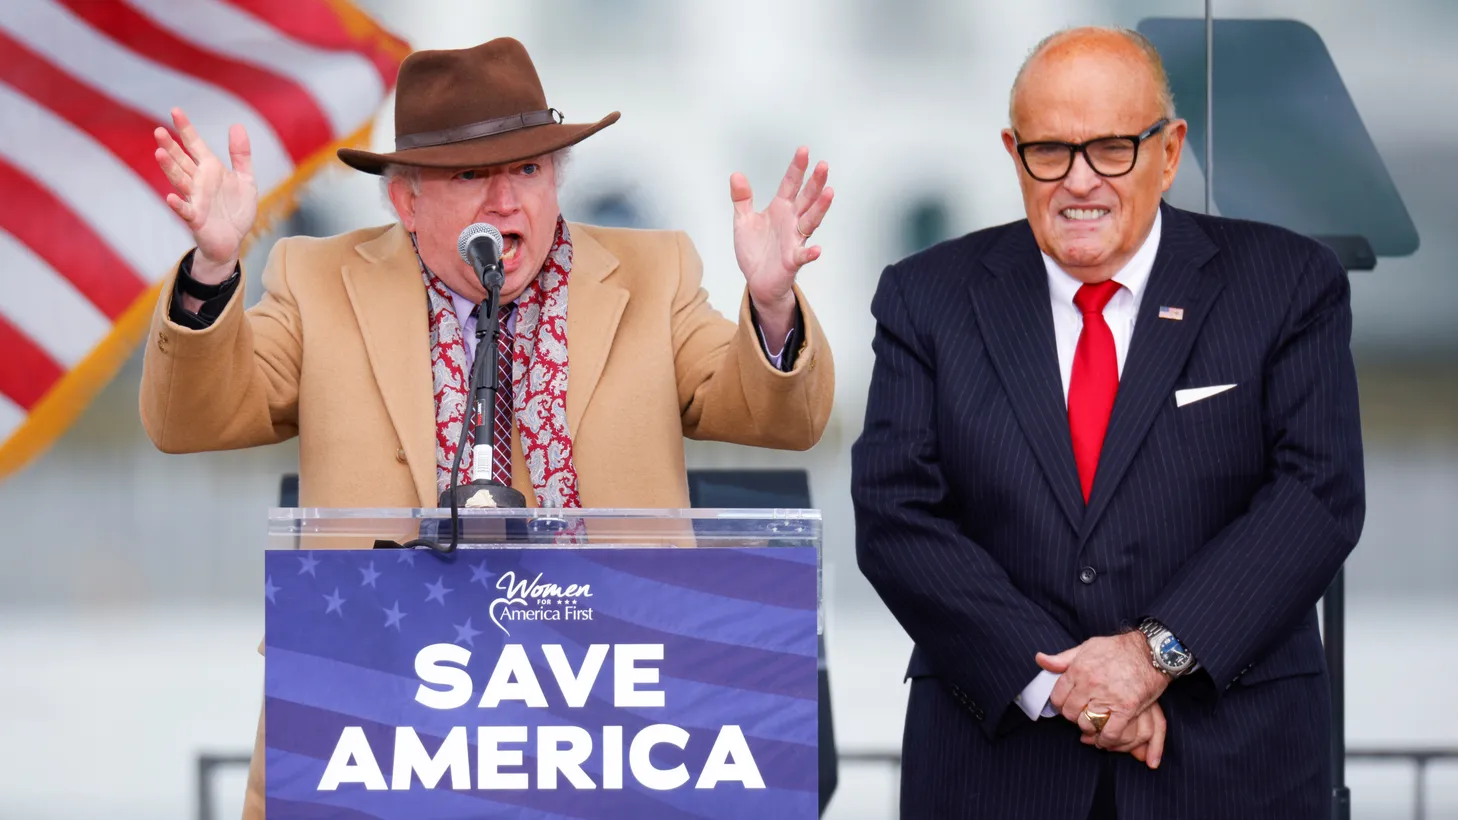 Chapman University law professor John Eastman, next to U.S. President Donald Trump's personal lawyer Rudy Giuliani, gestures as he speaks while Trump supporters gather ahead of his speech to contest the results of the 2020 U.S. presidential election in Washington, U.S, January 6, 2021.